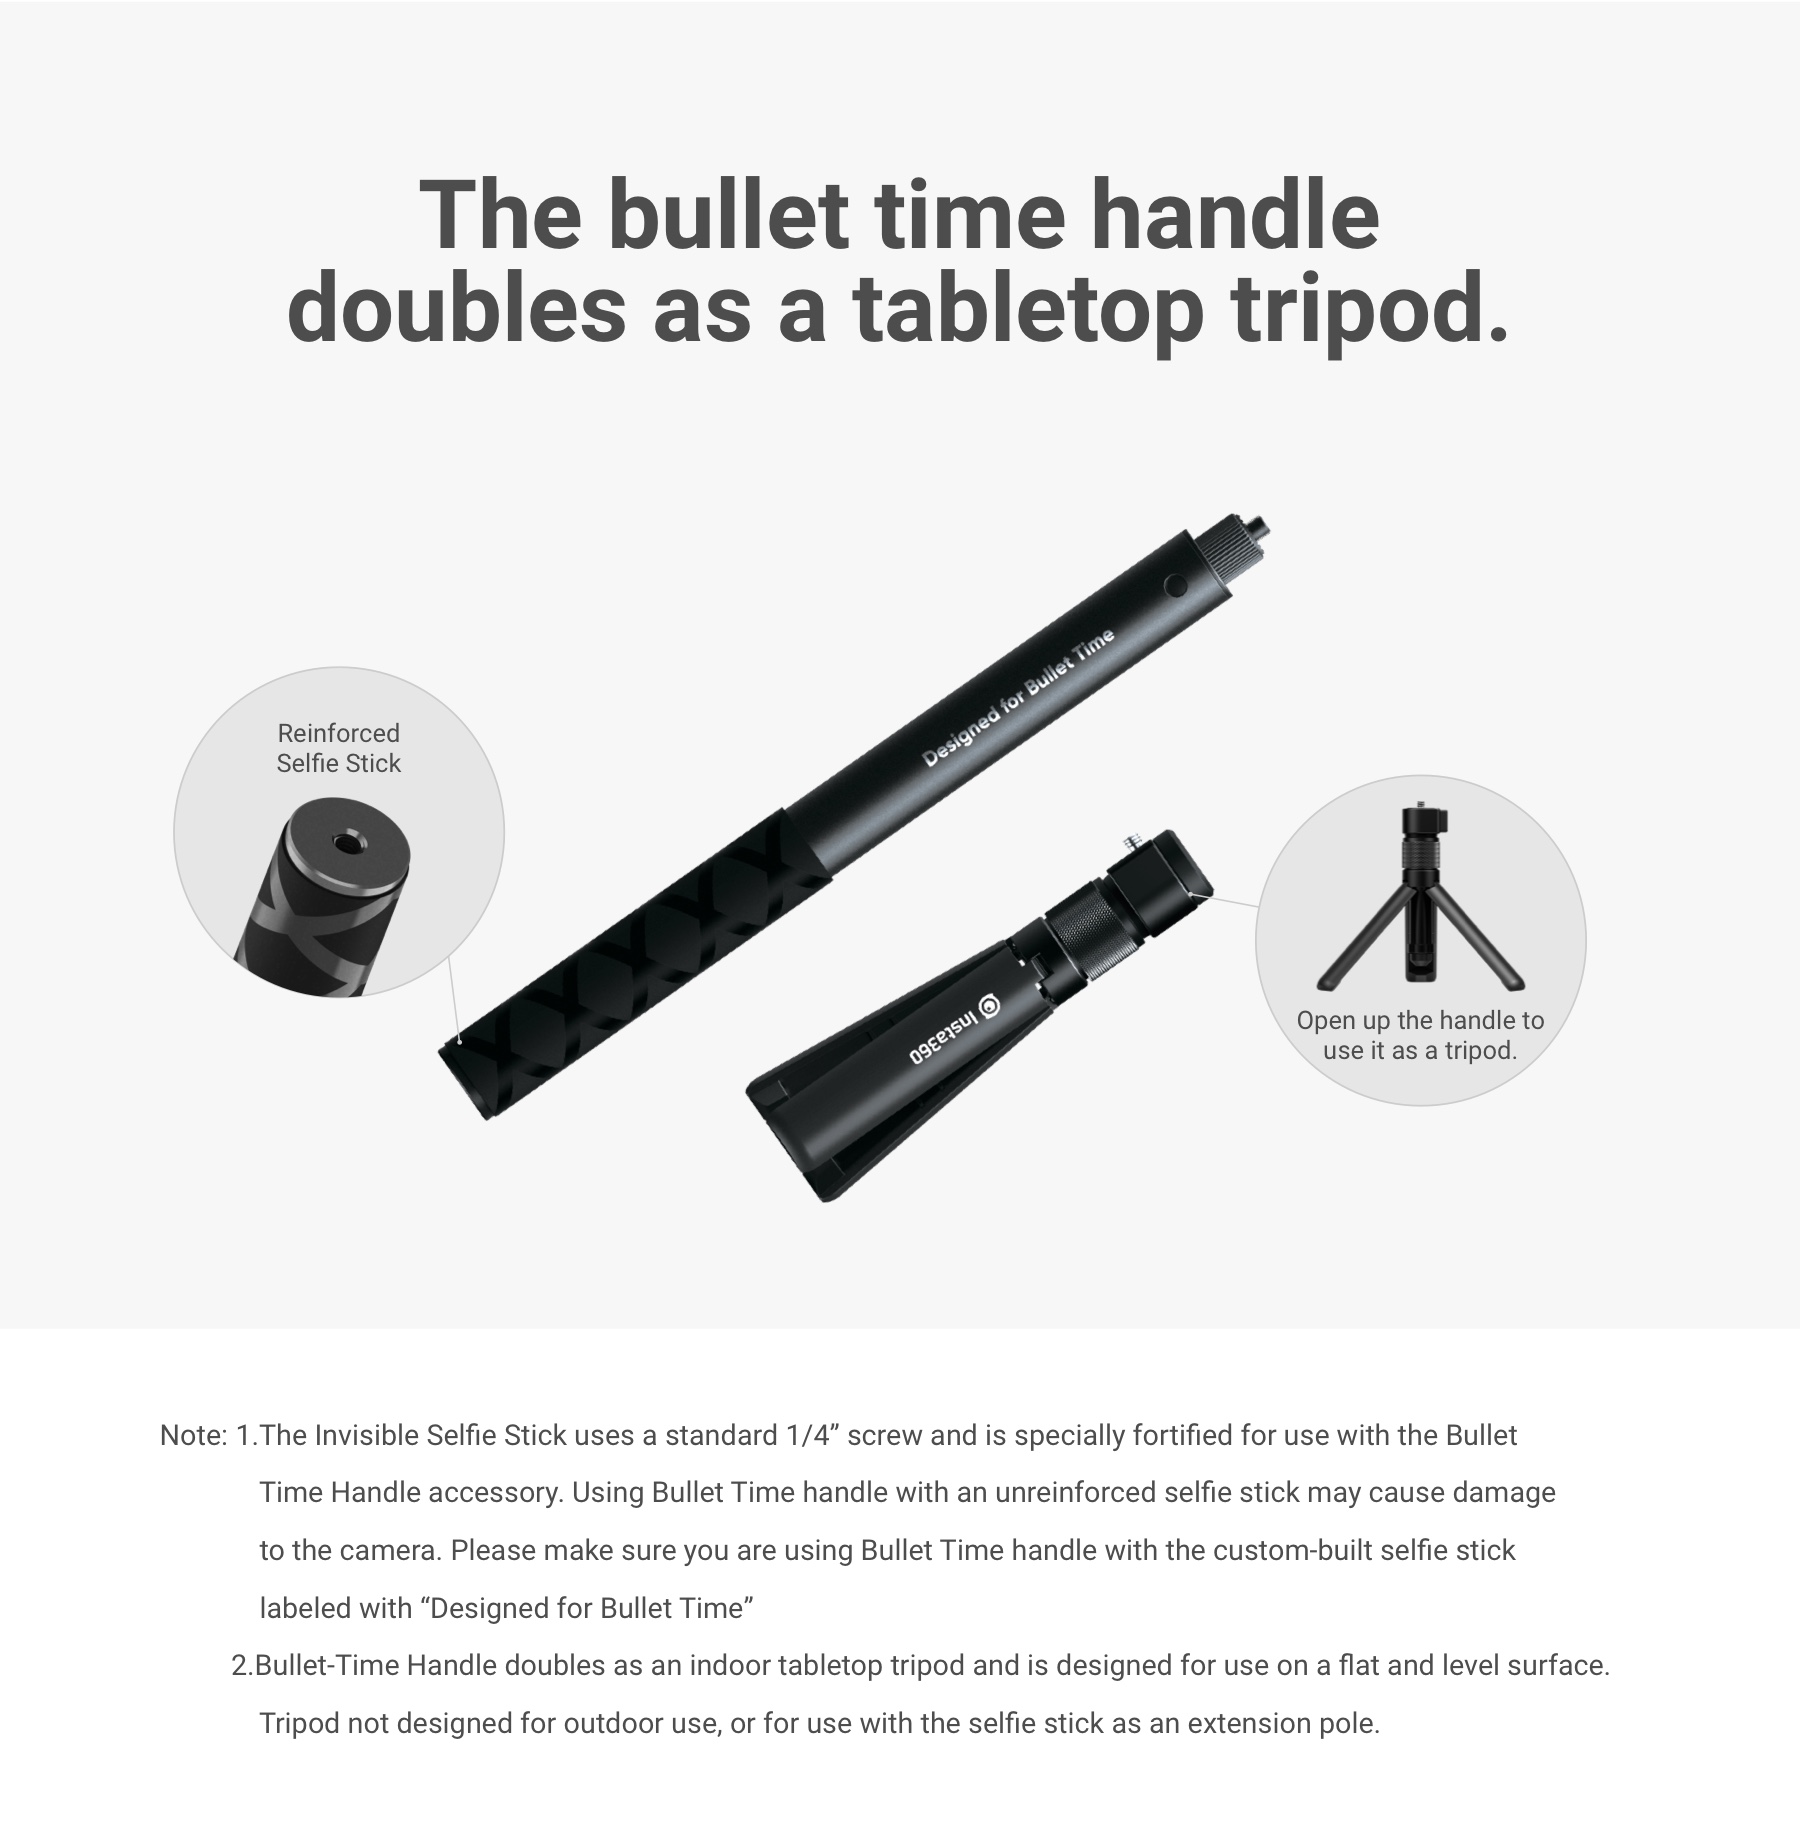 4 Copy 6 &Lt;H1&Gt;Insta360 Bullet Time Multi Function Handle (One X2/One R/One X/One)&Lt;/H1&Gt; &Lt;Div Class=&Quot;Index-Module__Intro___3Fz5N &Quot;&Gt; &Lt;Div Class=&Quot;Index-Module__Outter___1Ry-T&Quot; Data-Scroll=&Quot;True&Quot;&Gt; &Lt;Div Class=&Quot;Index-Module__Introwrap___3Y6Zz&Quot;&Gt; &Lt;Ul Class=&Quot; List-Paddingleft-2&Quot;&Gt; &Lt;Li&Gt;The Bullet Time Tripod Handle Doubles As A Tabletop Tripod And A Selfie Stick Handle For Swinging Your Camera Overhead.&Lt;/Li&Gt; &Lt;Li&Gt;Compatibility: One X2, One R, One X, One&Lt;/Li&Gt; &Lt;Li&Gt;Bullet-Time Handle Doubles As An Indoor Tabletop Tripod. Tripod Not Designed For Outdoor Use, Or For Use With The Selfie Stick As An Extension Pole.&Lt;/Li&Gt; &Lt;Li&Gt;&Lt;Strong&Gt;Handle (Tripod) Includes 1X Bullet Time Tripod Handle. &Lt;/Strong&Gt;&Lt;/Li&Gt; &Lt;Li&Gt;&Lt;Strong&Gt;Selfie Stick Is Sold Separately &Lt;/Strong&Gt;&Lt;/Li&Gt; &Lt;/Ul&Gt; &Lt;/Div&Gt; &Lt;Div Class=&Quot;Index-Module__Introwrap___3Y6Zz&Quot;&Gt;&Lt;/Div&Gt; &Lt;/Div&Gt; &Lt;/Div&Gt; Insta360 Bullet Time Multi Function Handle Insta360 Bullet Time Multi Function Handle (One X2/One R/One X/One)